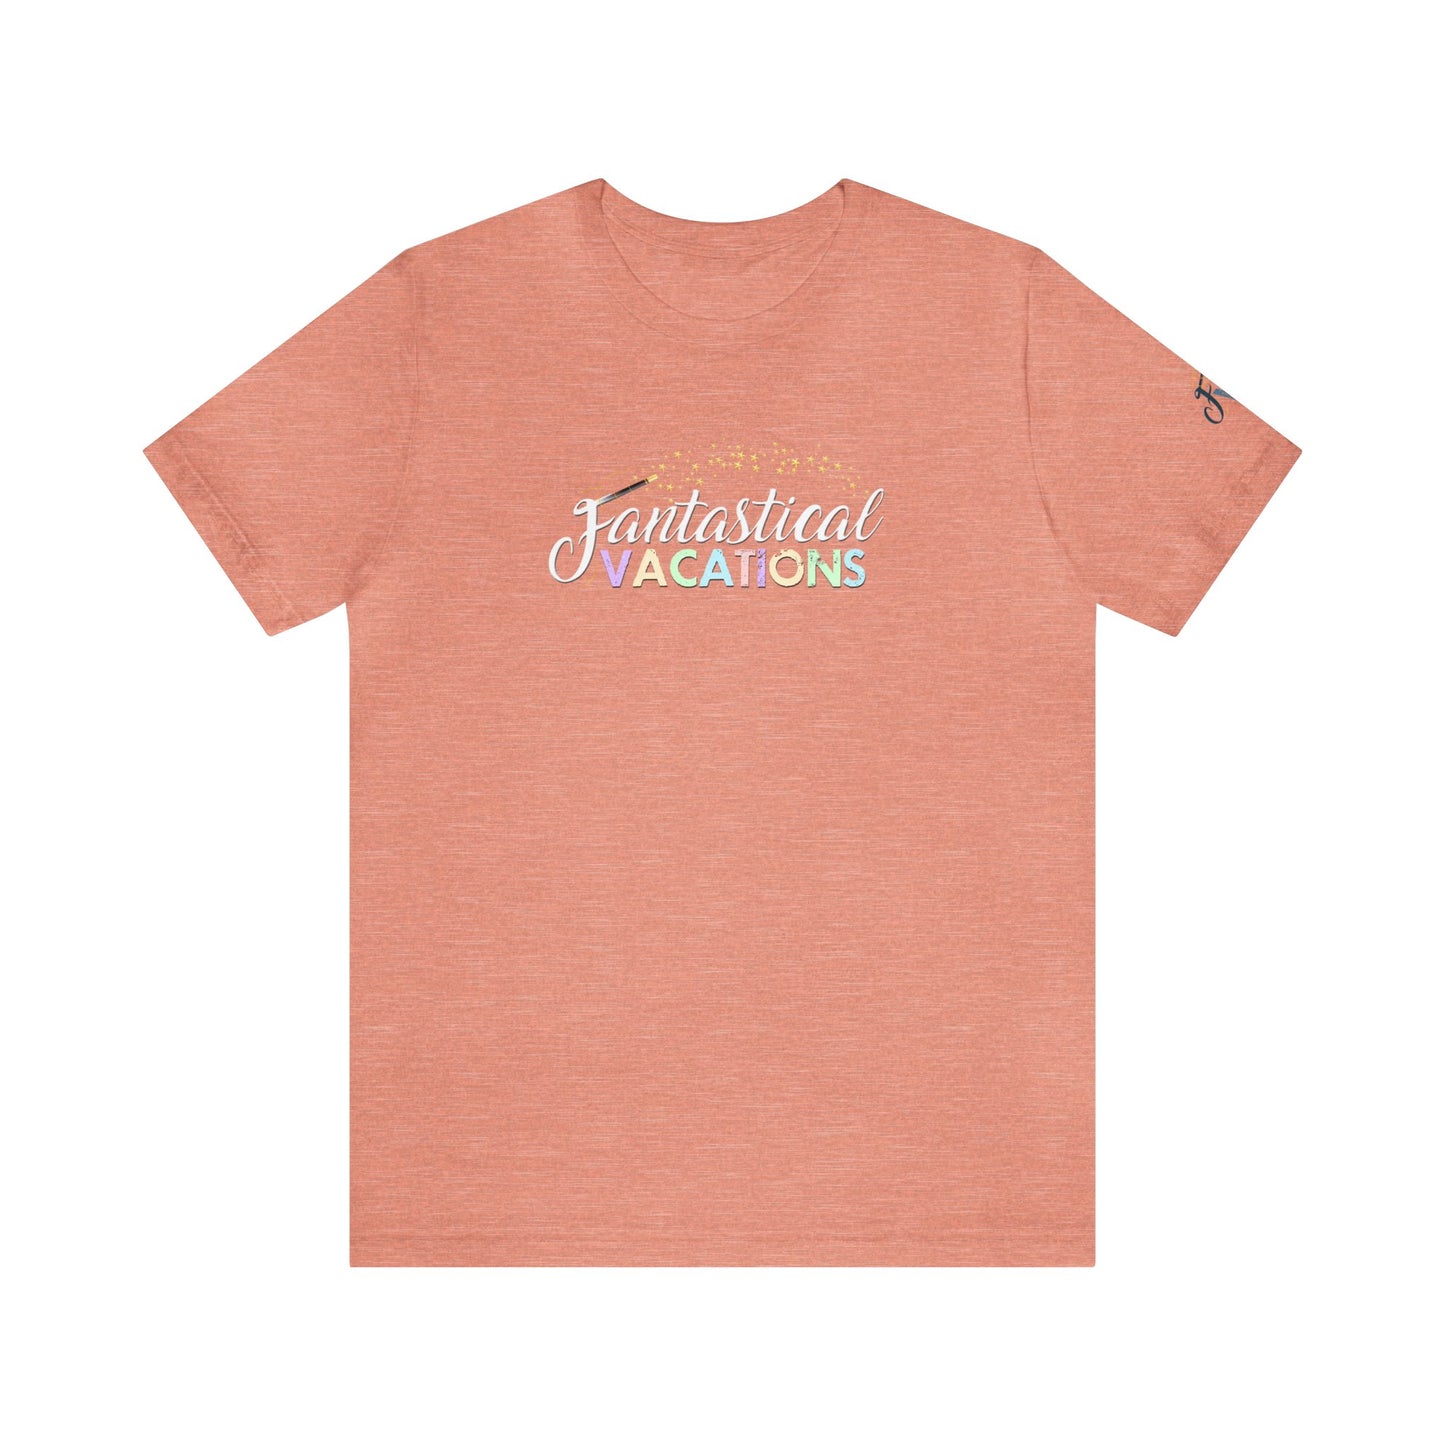 NEW! Spring Colors Fantastical Vacations Unisex Tee